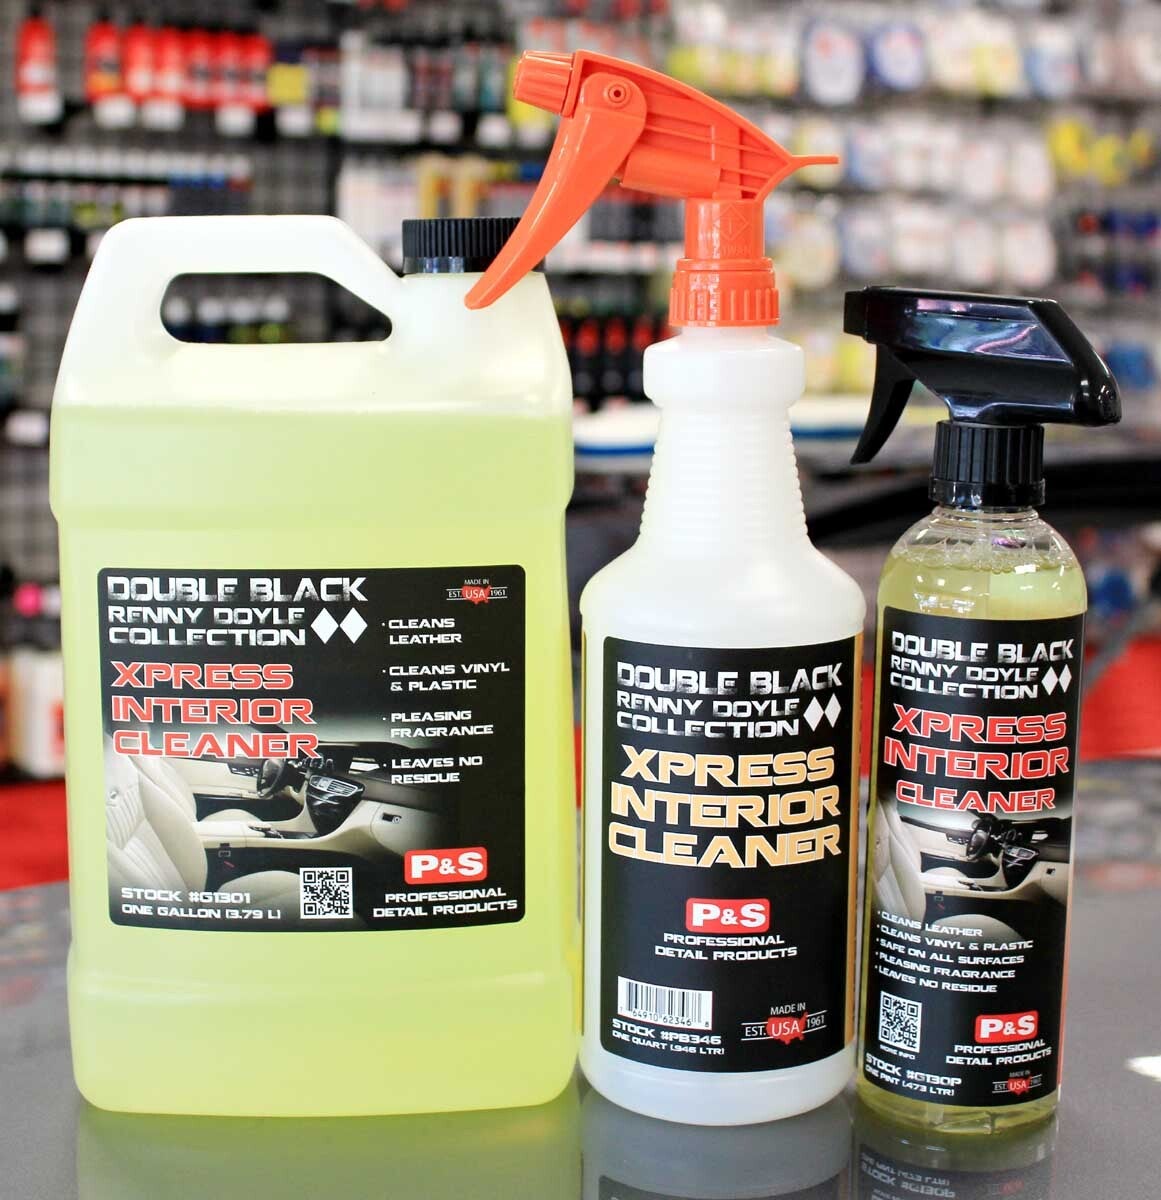 P&S Xpress Interior Cleaner - The Best Residue Free Interior Cleaning for  Your Car or Truck 